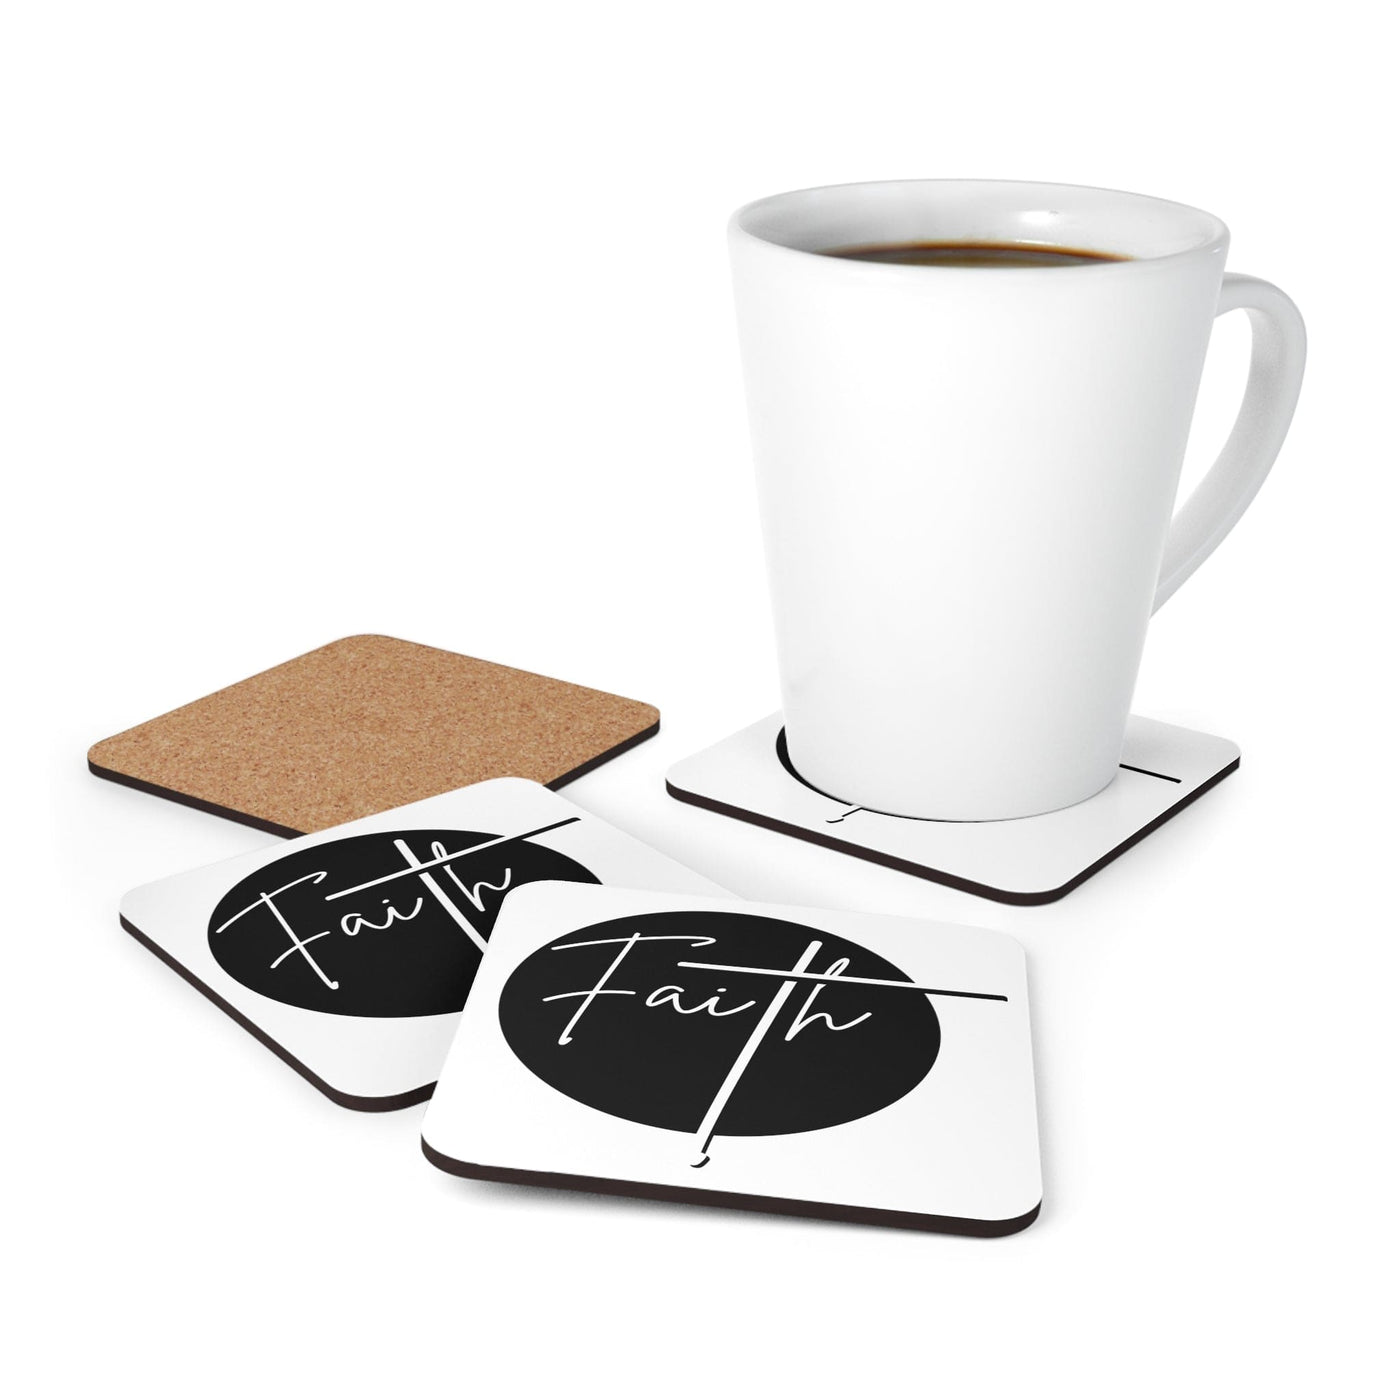 Handcrafted Square Coaster Set Of 4 For Drinks And Cups Faith Print